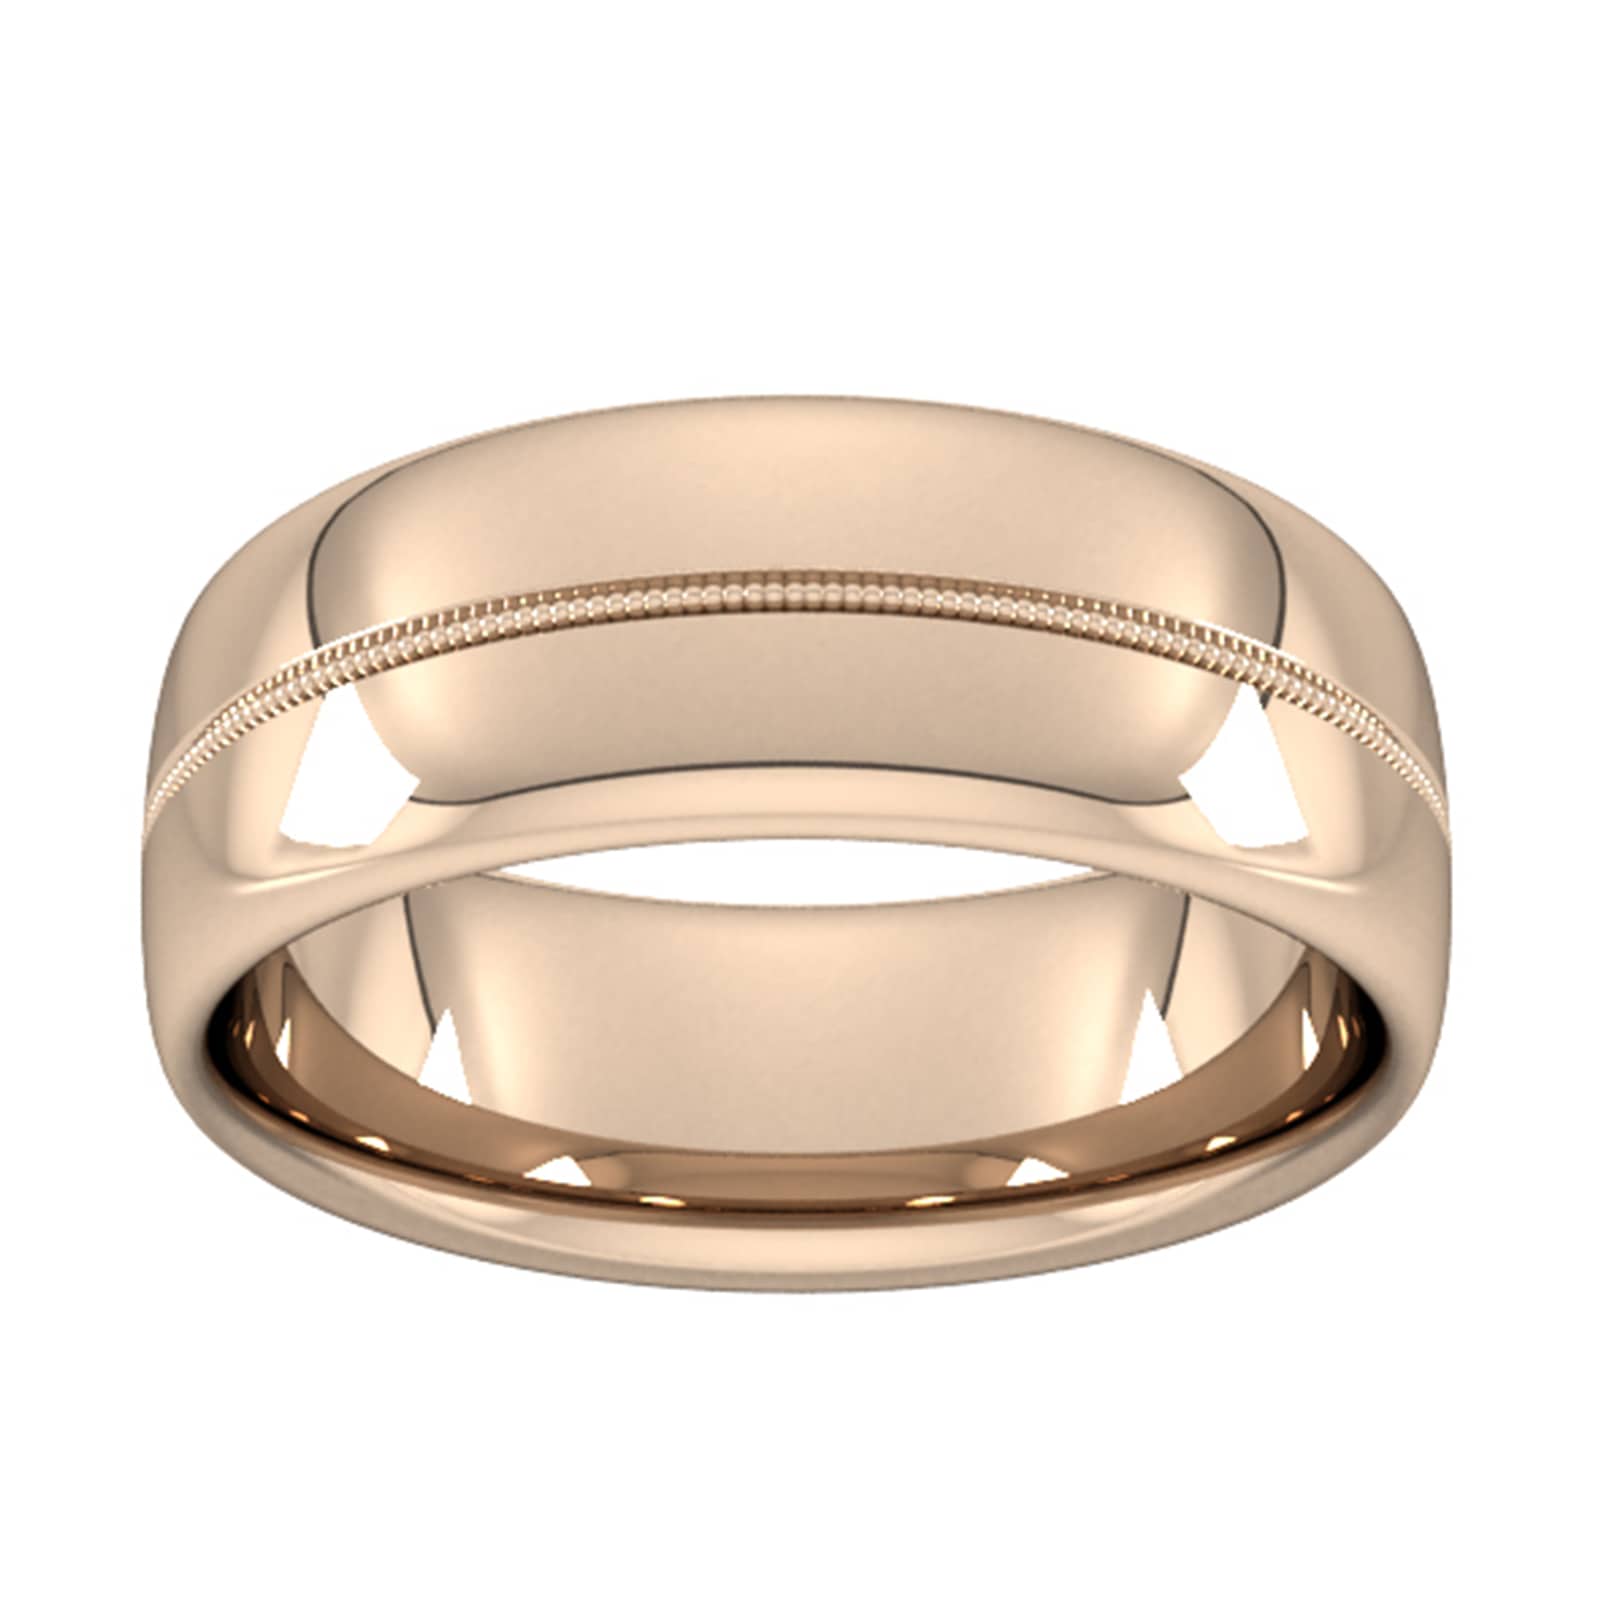 8mm Traditional Court Heavy Milgrain Centre Wedding Ring In 18 Carat Rose Gold - Ring Size Q